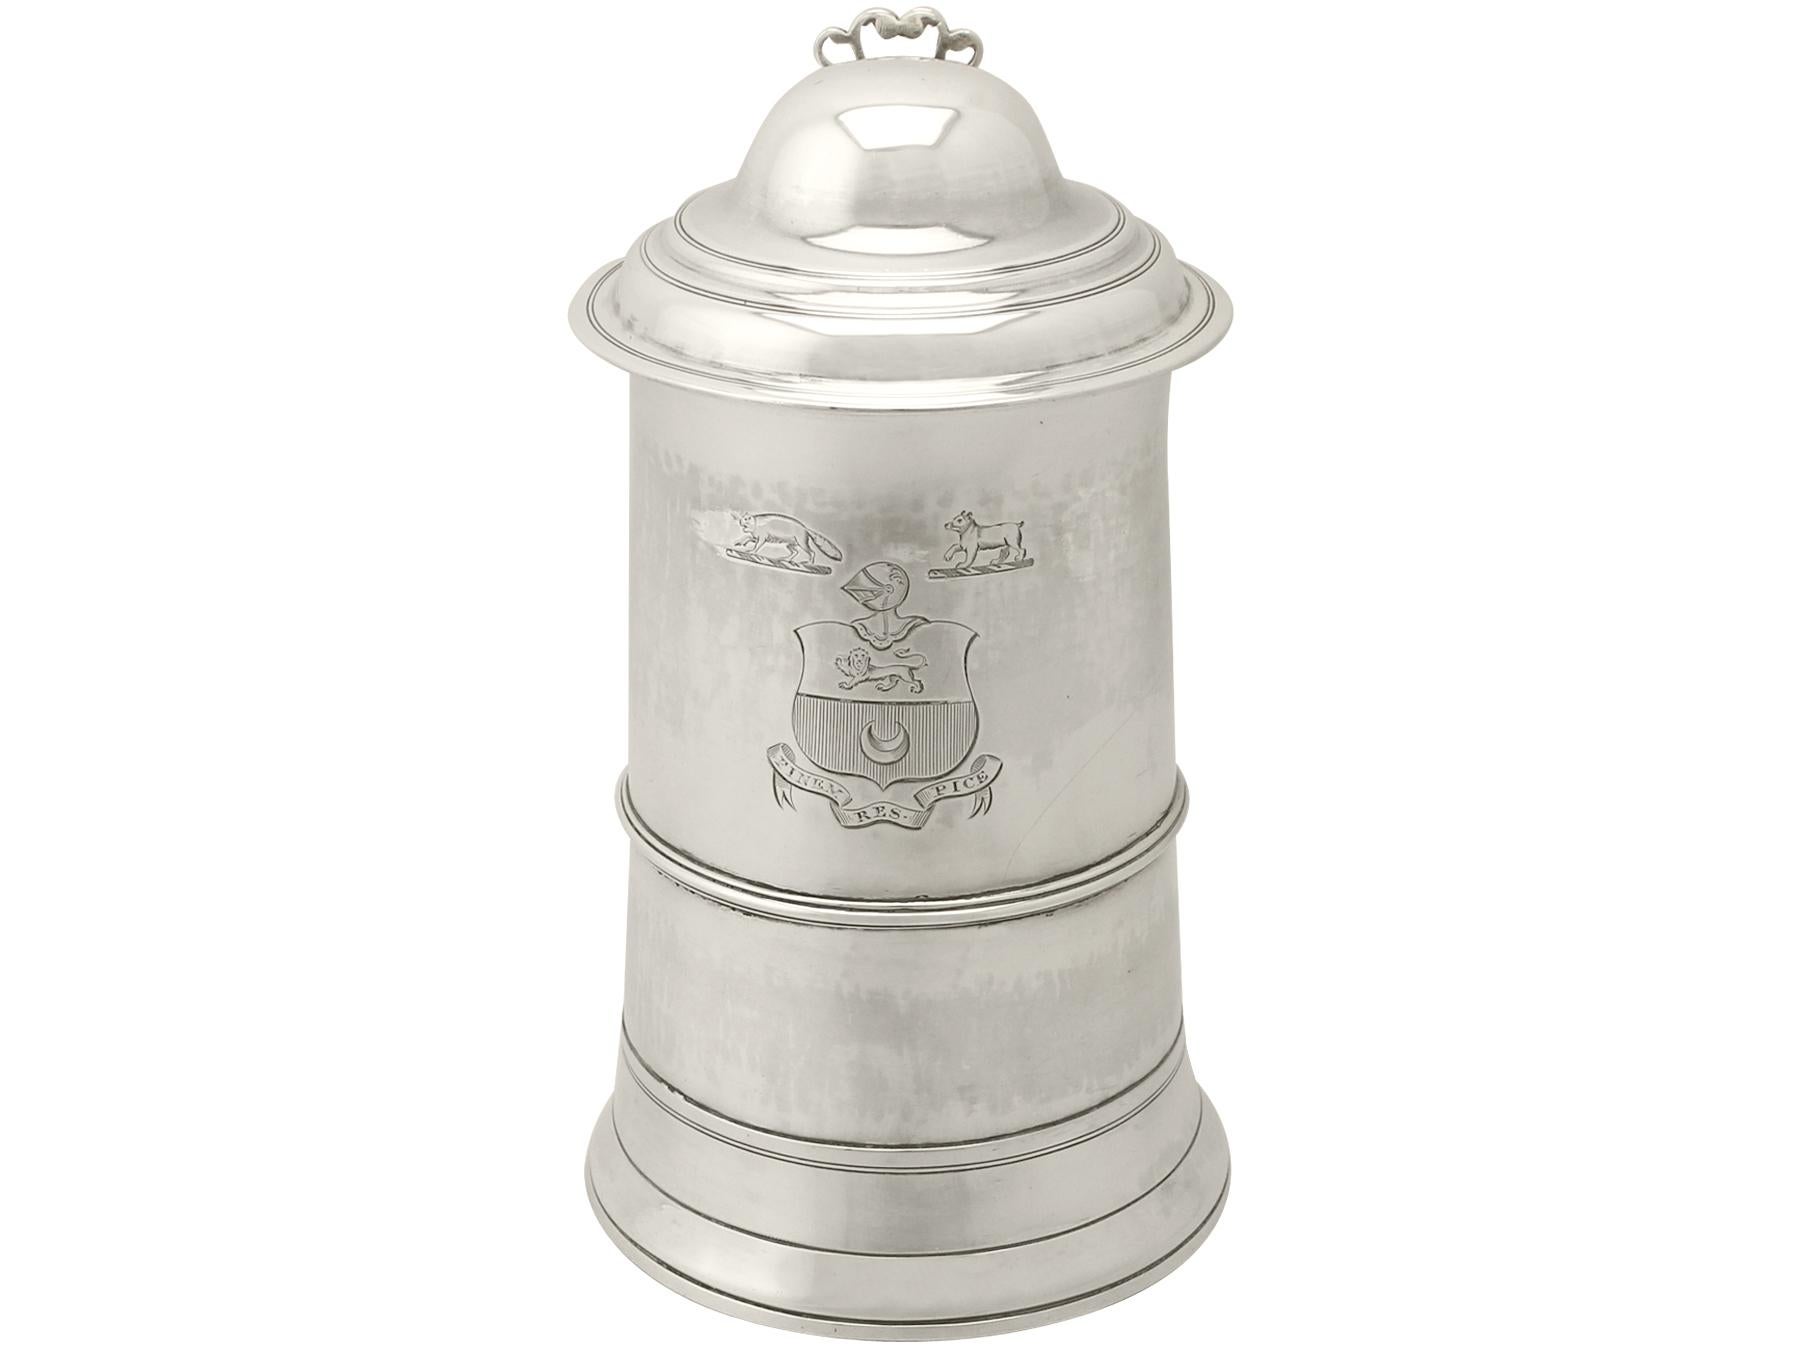 A fine and impressive antique George III English sterling silver quart tankard, an addition to our silver Georgian tankard collection

This exceptional antique George III sterling silver pint and a half tankard has a plain cylindrical tapering